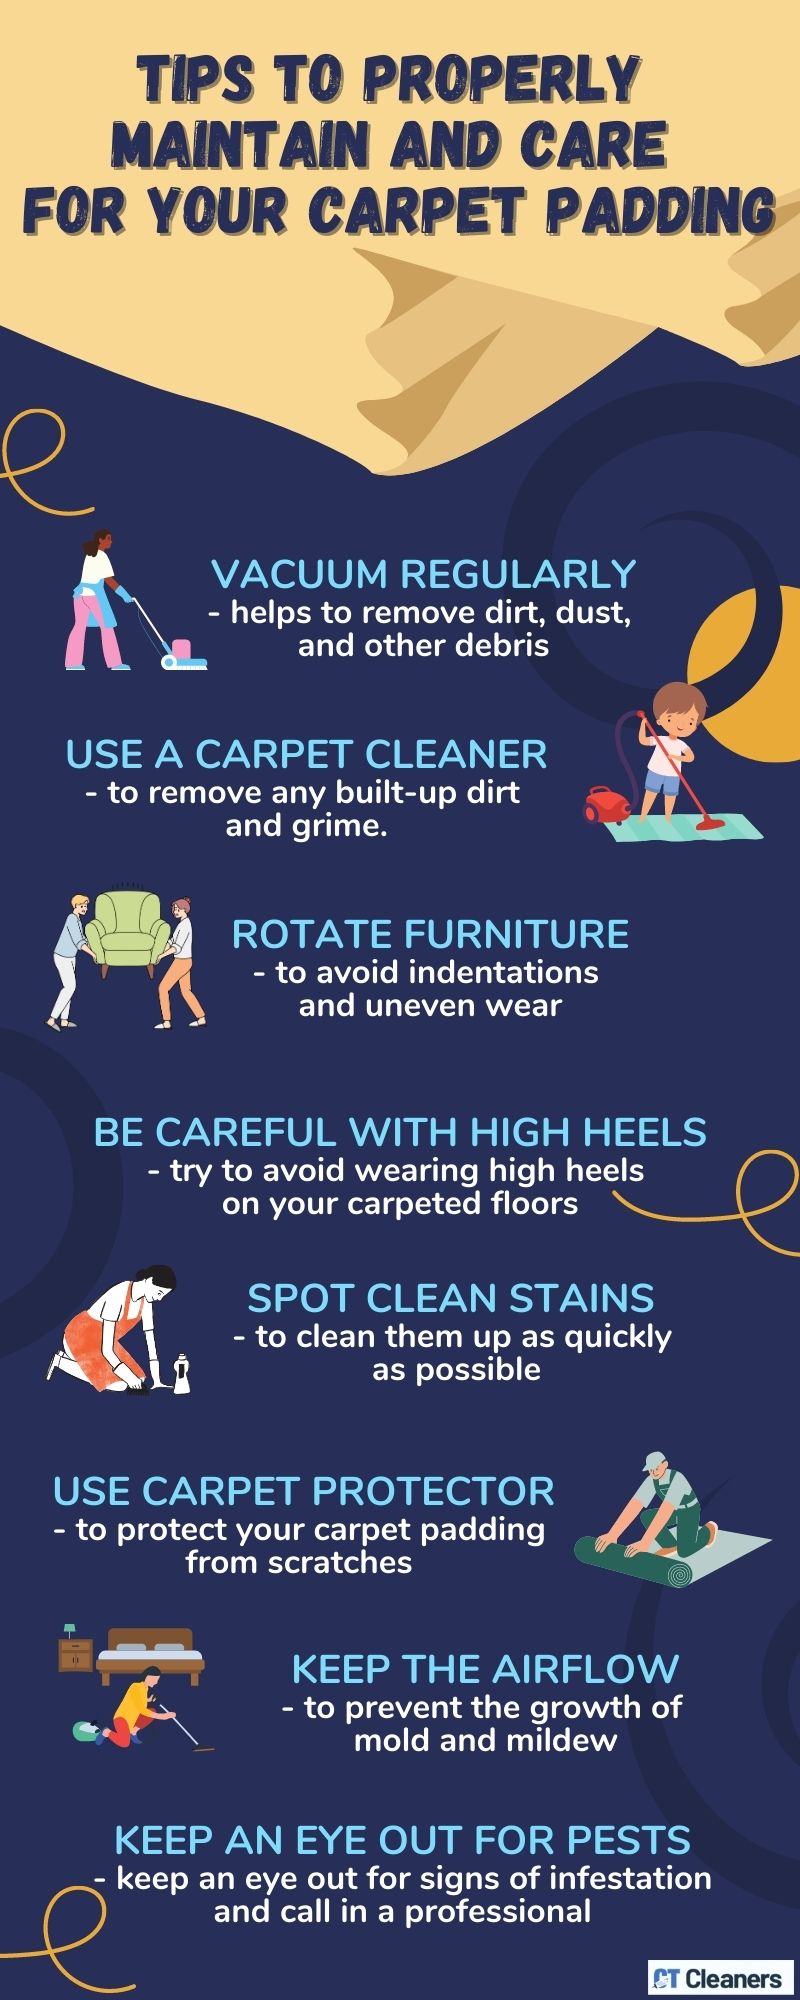 Tips to Properly Maintain and Care for Your Carpet Padding (1)